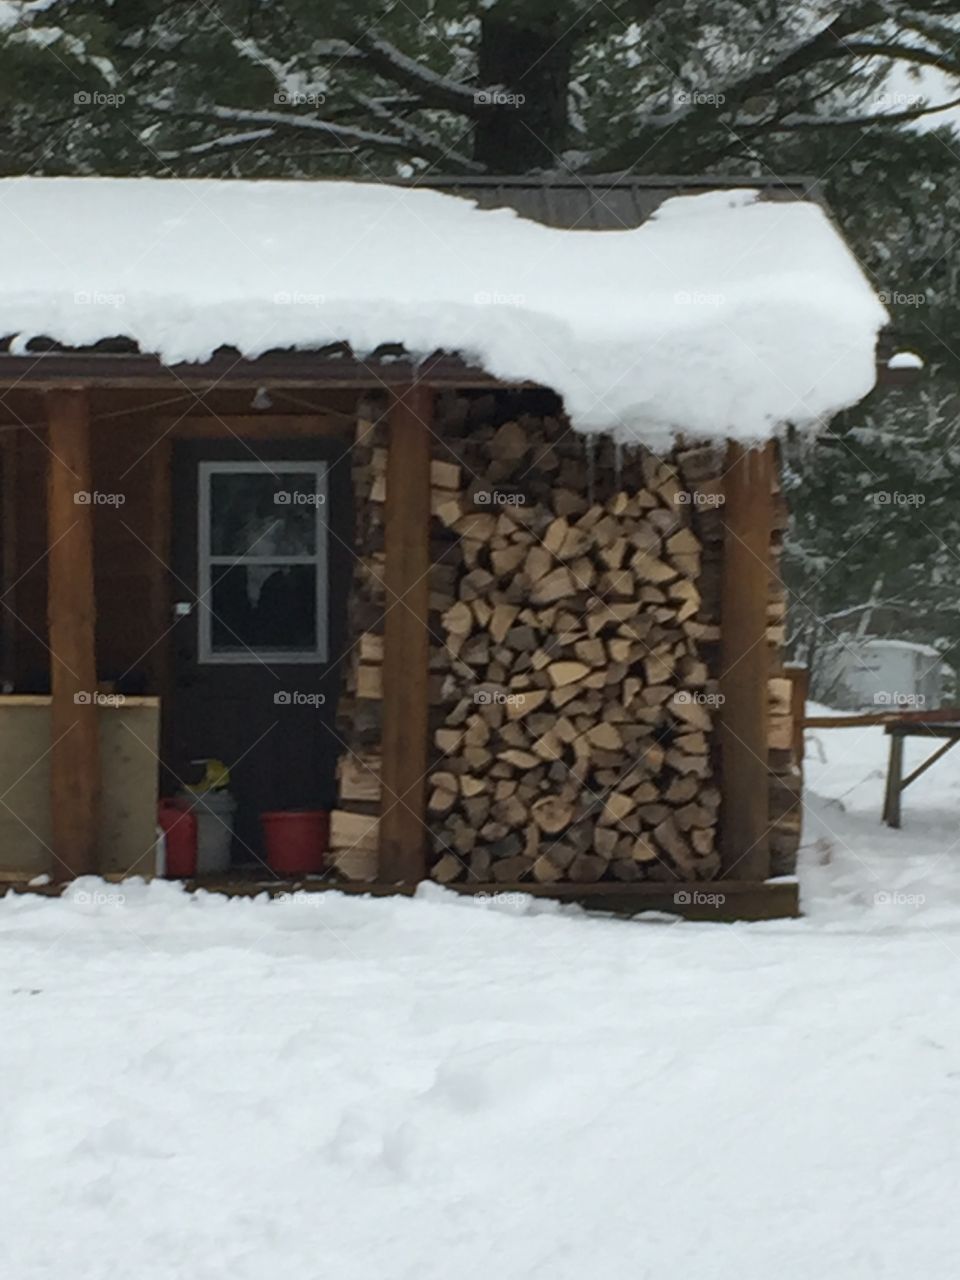 This cute little cabin is ready for winter wood piled up under the porch for easy access for this cold winter nights